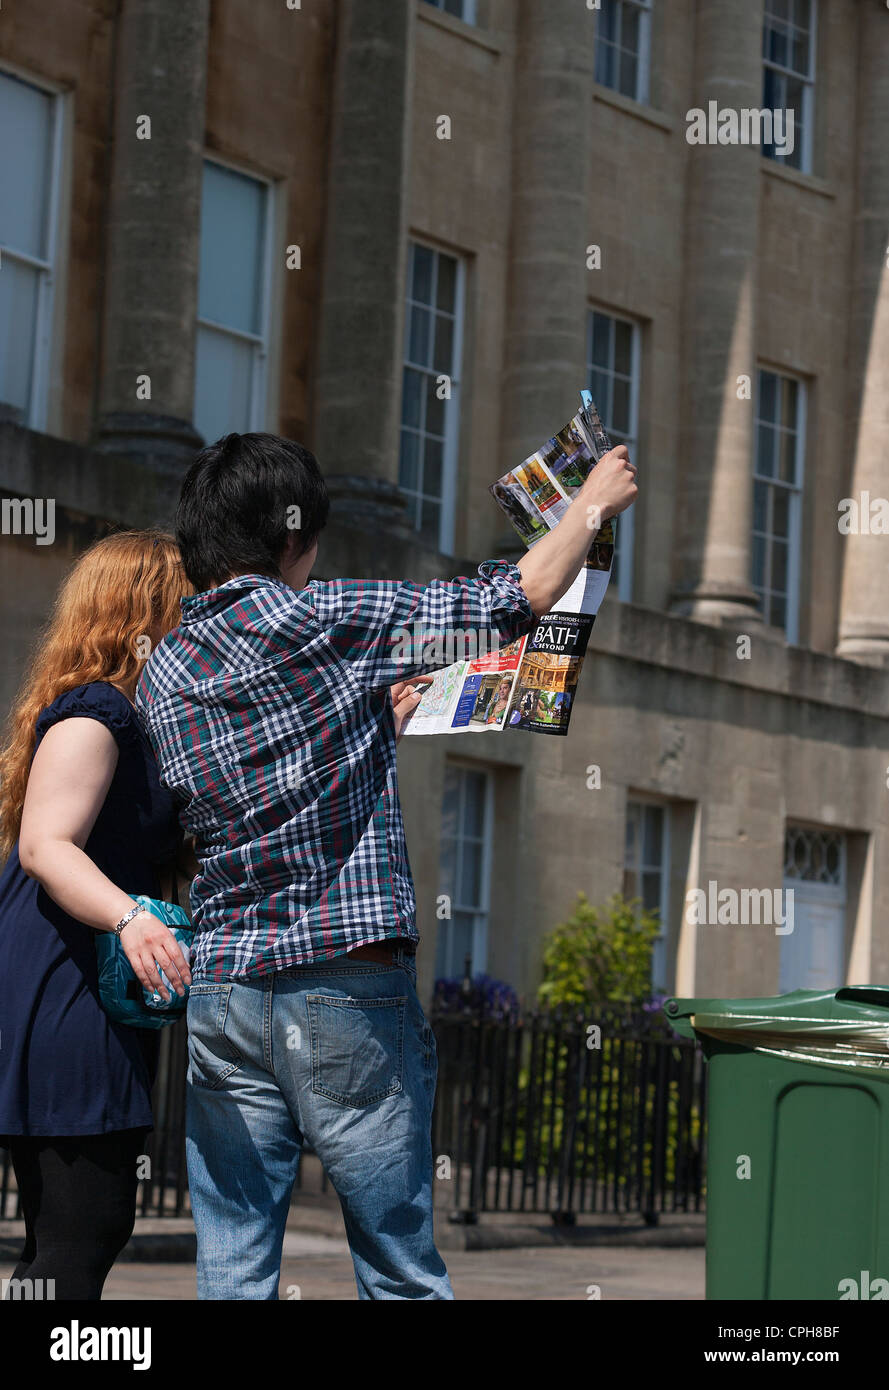 Two visitors to Bath look at a map of the city as they stand in Bath's famous Royal Crescent. Bath, Somerset, England, UK. Stock Photo